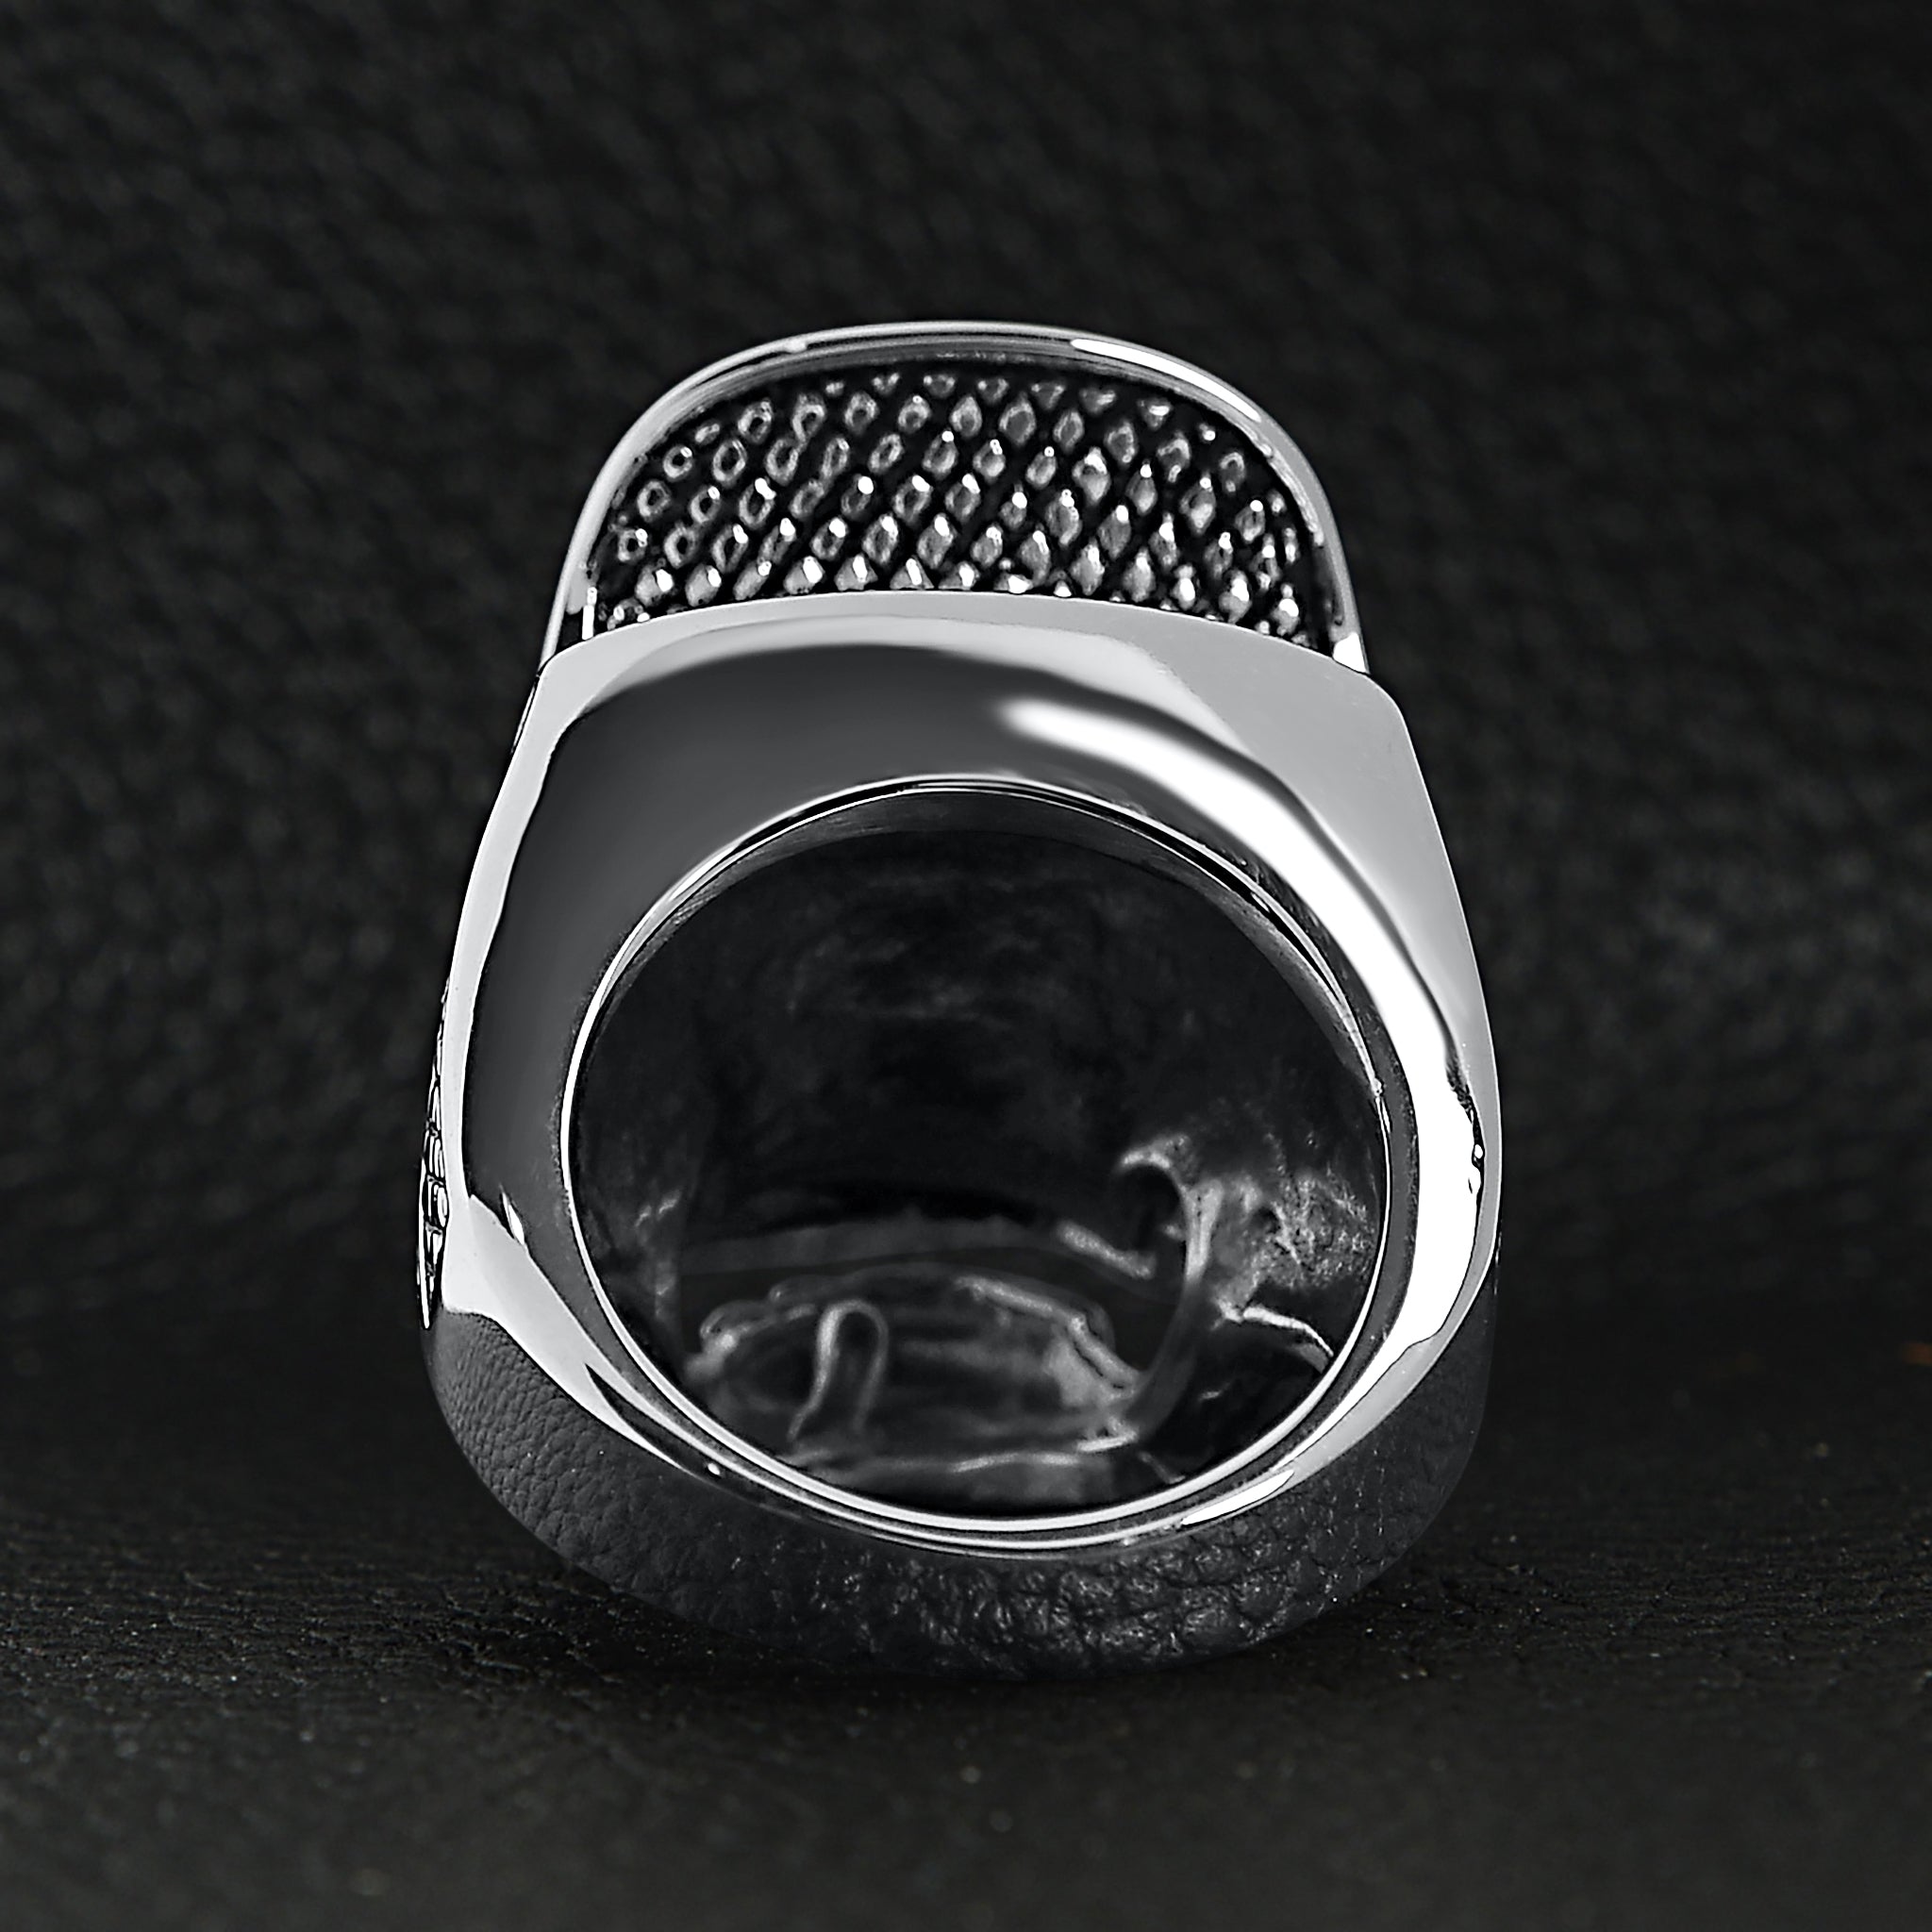 Stainless Steel Skull Ring for Men - Durable and Hypoallergenic - Jewelry & Watches - Bijou Her -  -  - 